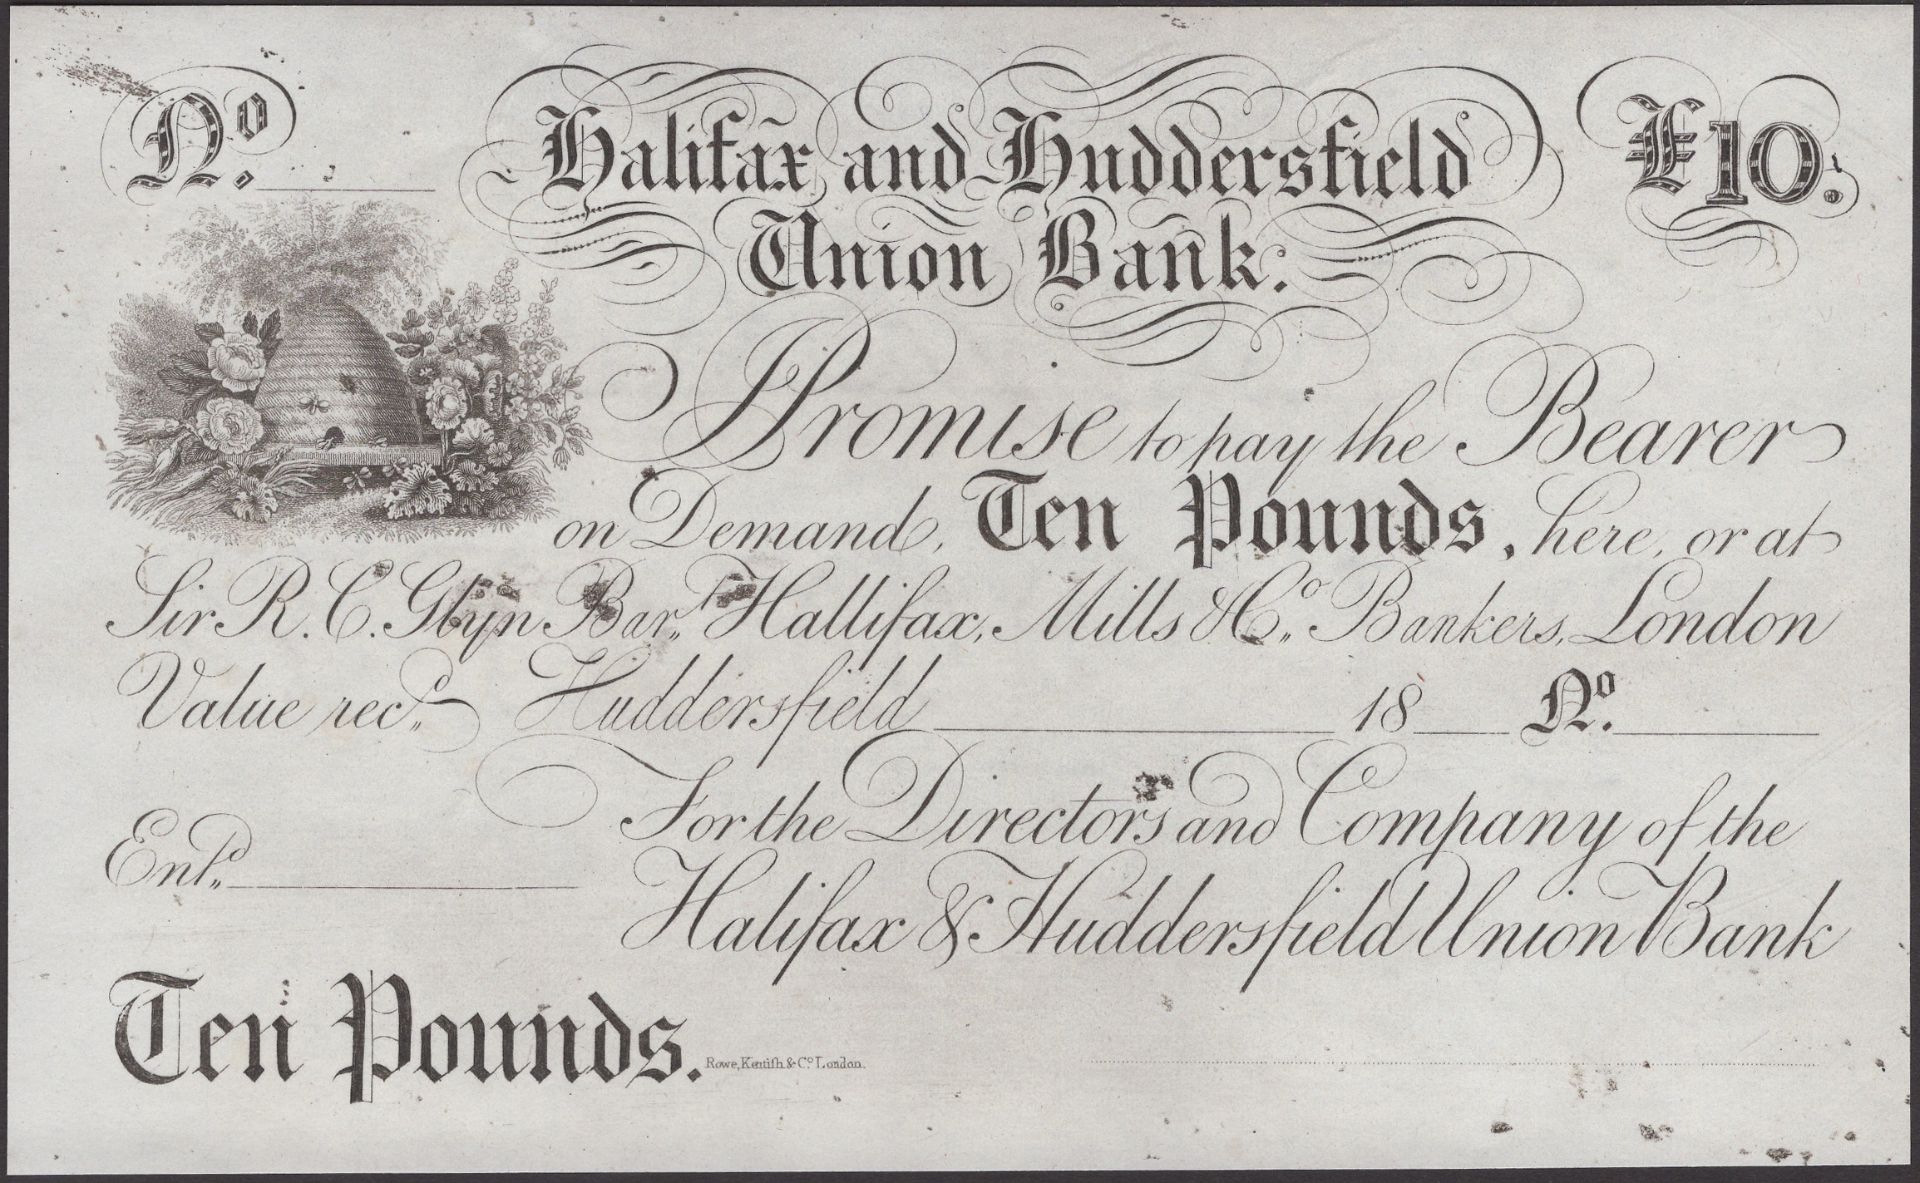 Halifax and Huddersfield Union Banking Co. Limited, for the Directors and Company of the Hal...